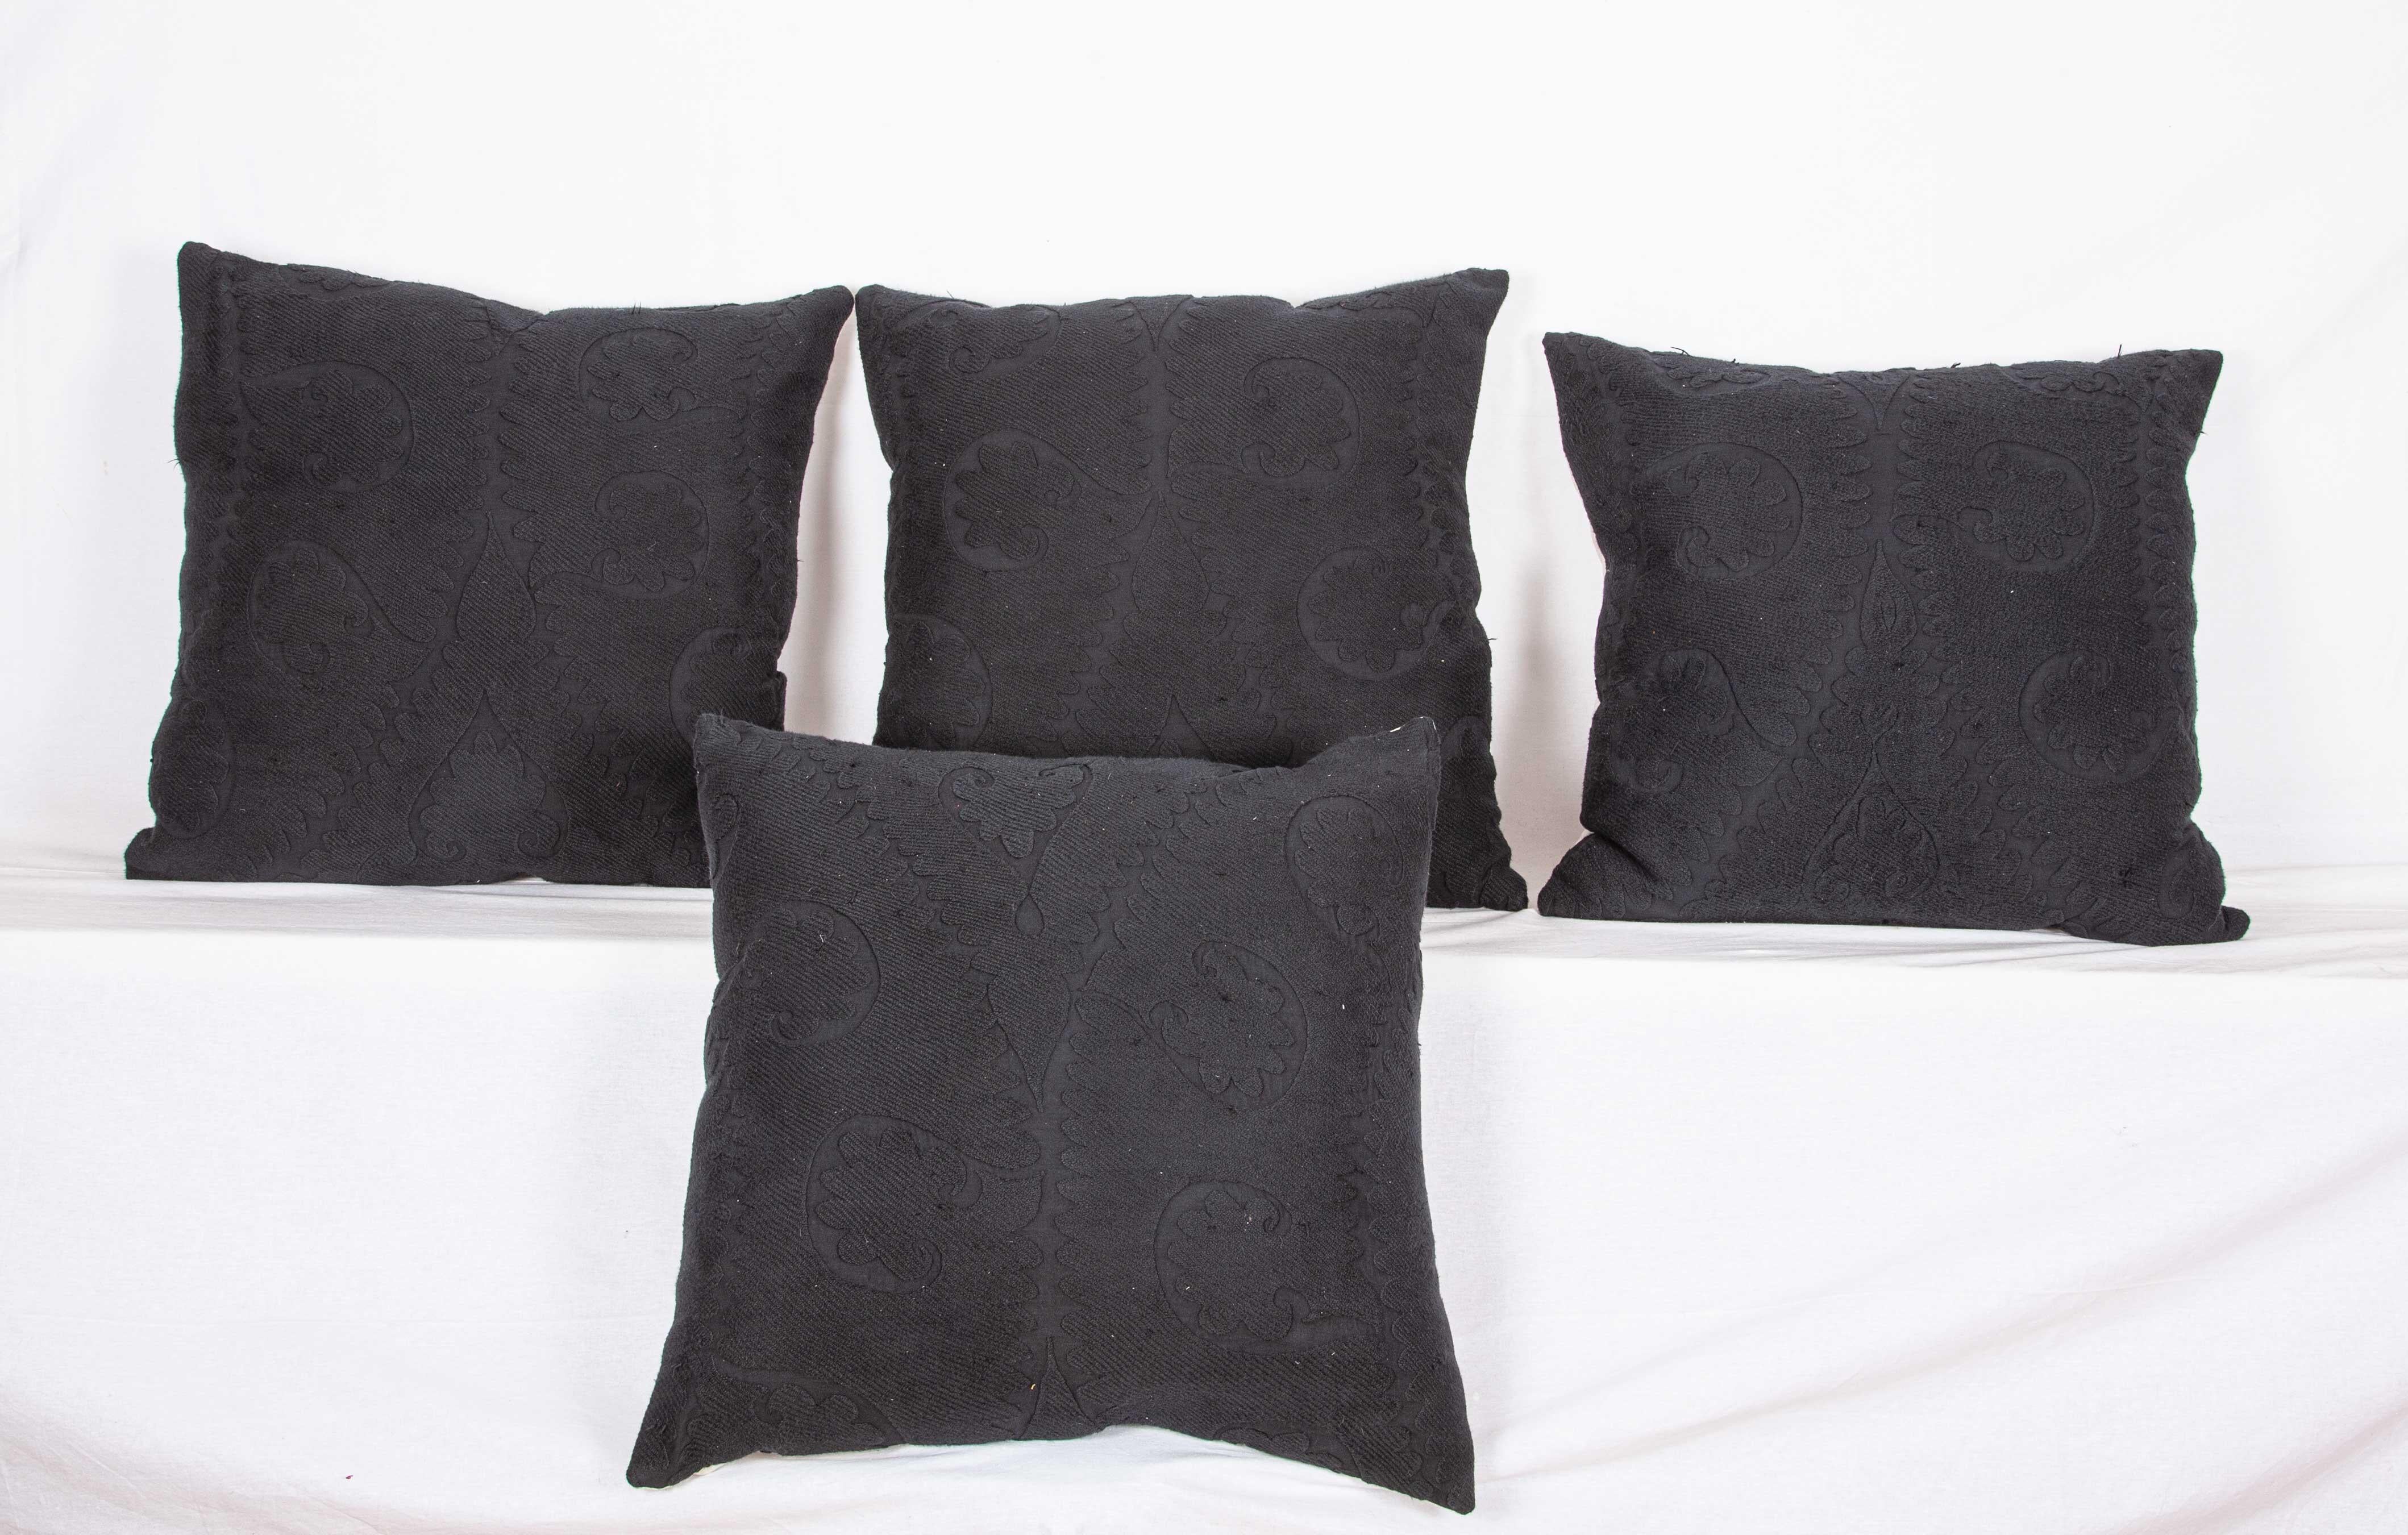 These Suzani pillow cases fashioned from vintage Suzanis that are overdyed. The results are here, a minimalist look with some texture.
Linen in the back
Zipper closure
Dry cleaning is recommended

Measures: 60 x 60 cm / 23.62 x 23.62 in.
60 x